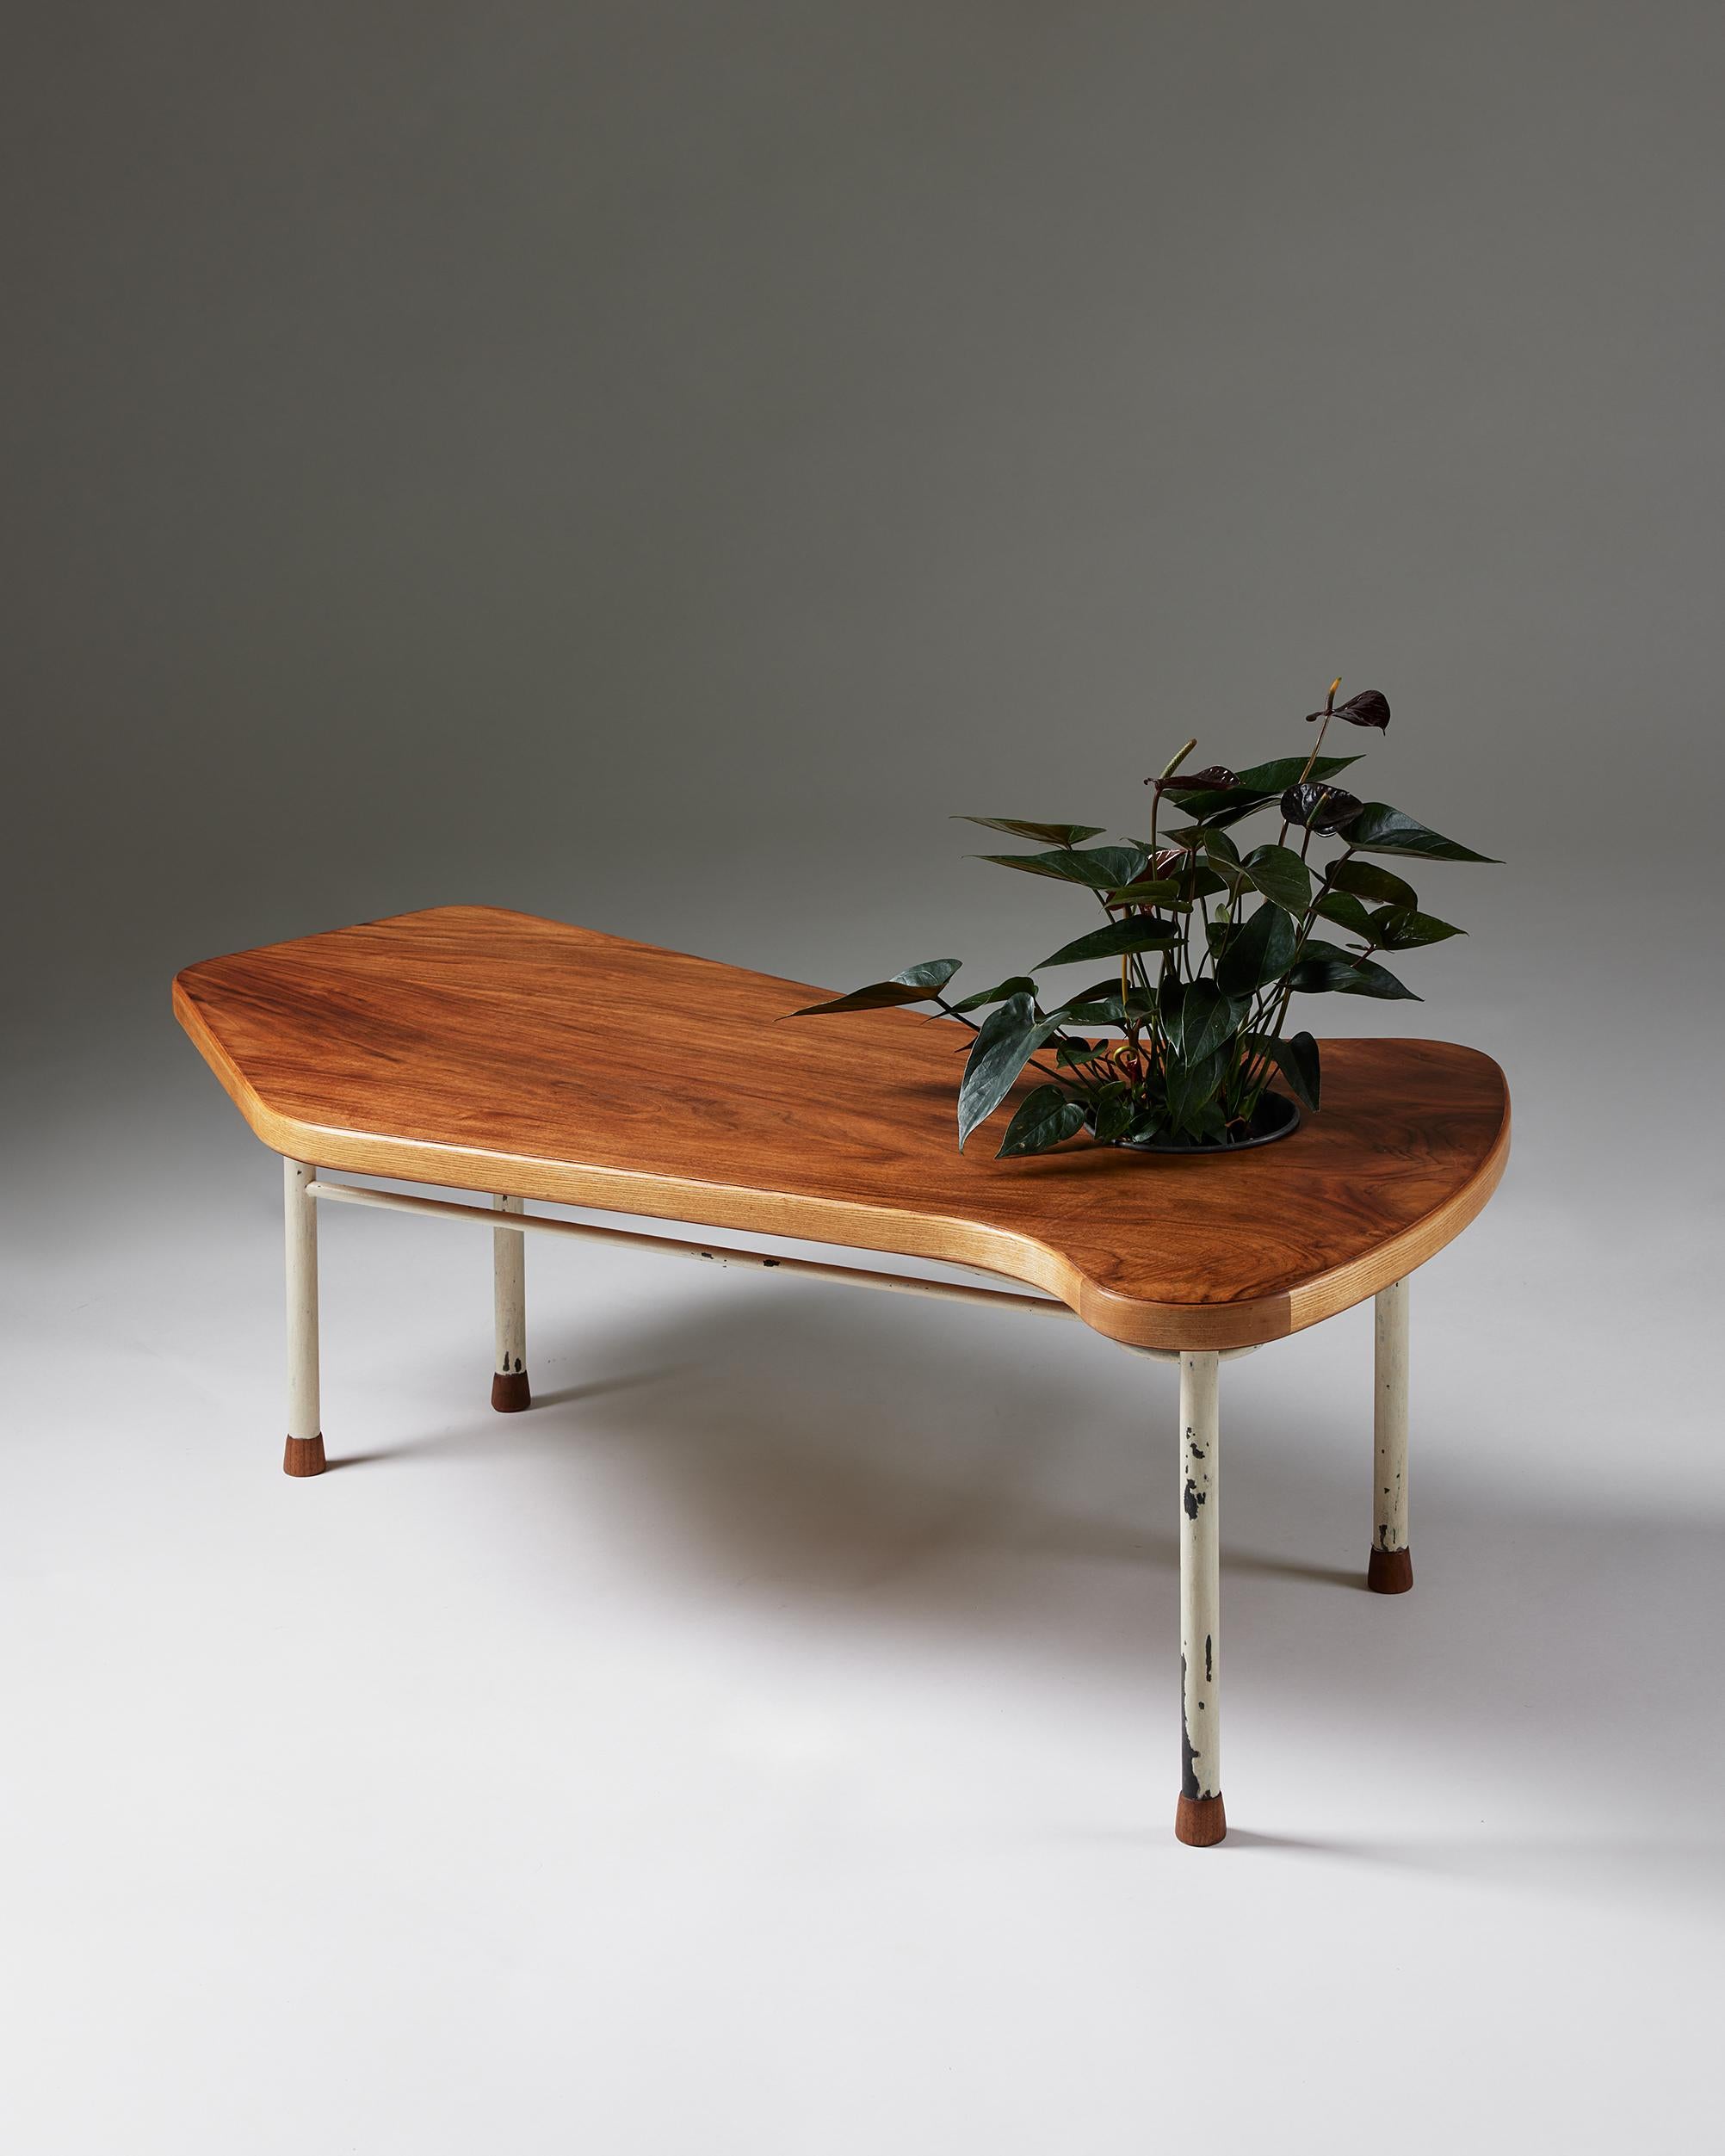 Coffee table designed by Finn Juhl for Niels Vodder,
Denmark, 1941.

Walnut-veneered wood, ash, walnut, painted steel, and aluminium.

Only two of these coffee tables with an integrated planter are known to have been made.

Provenance: From a